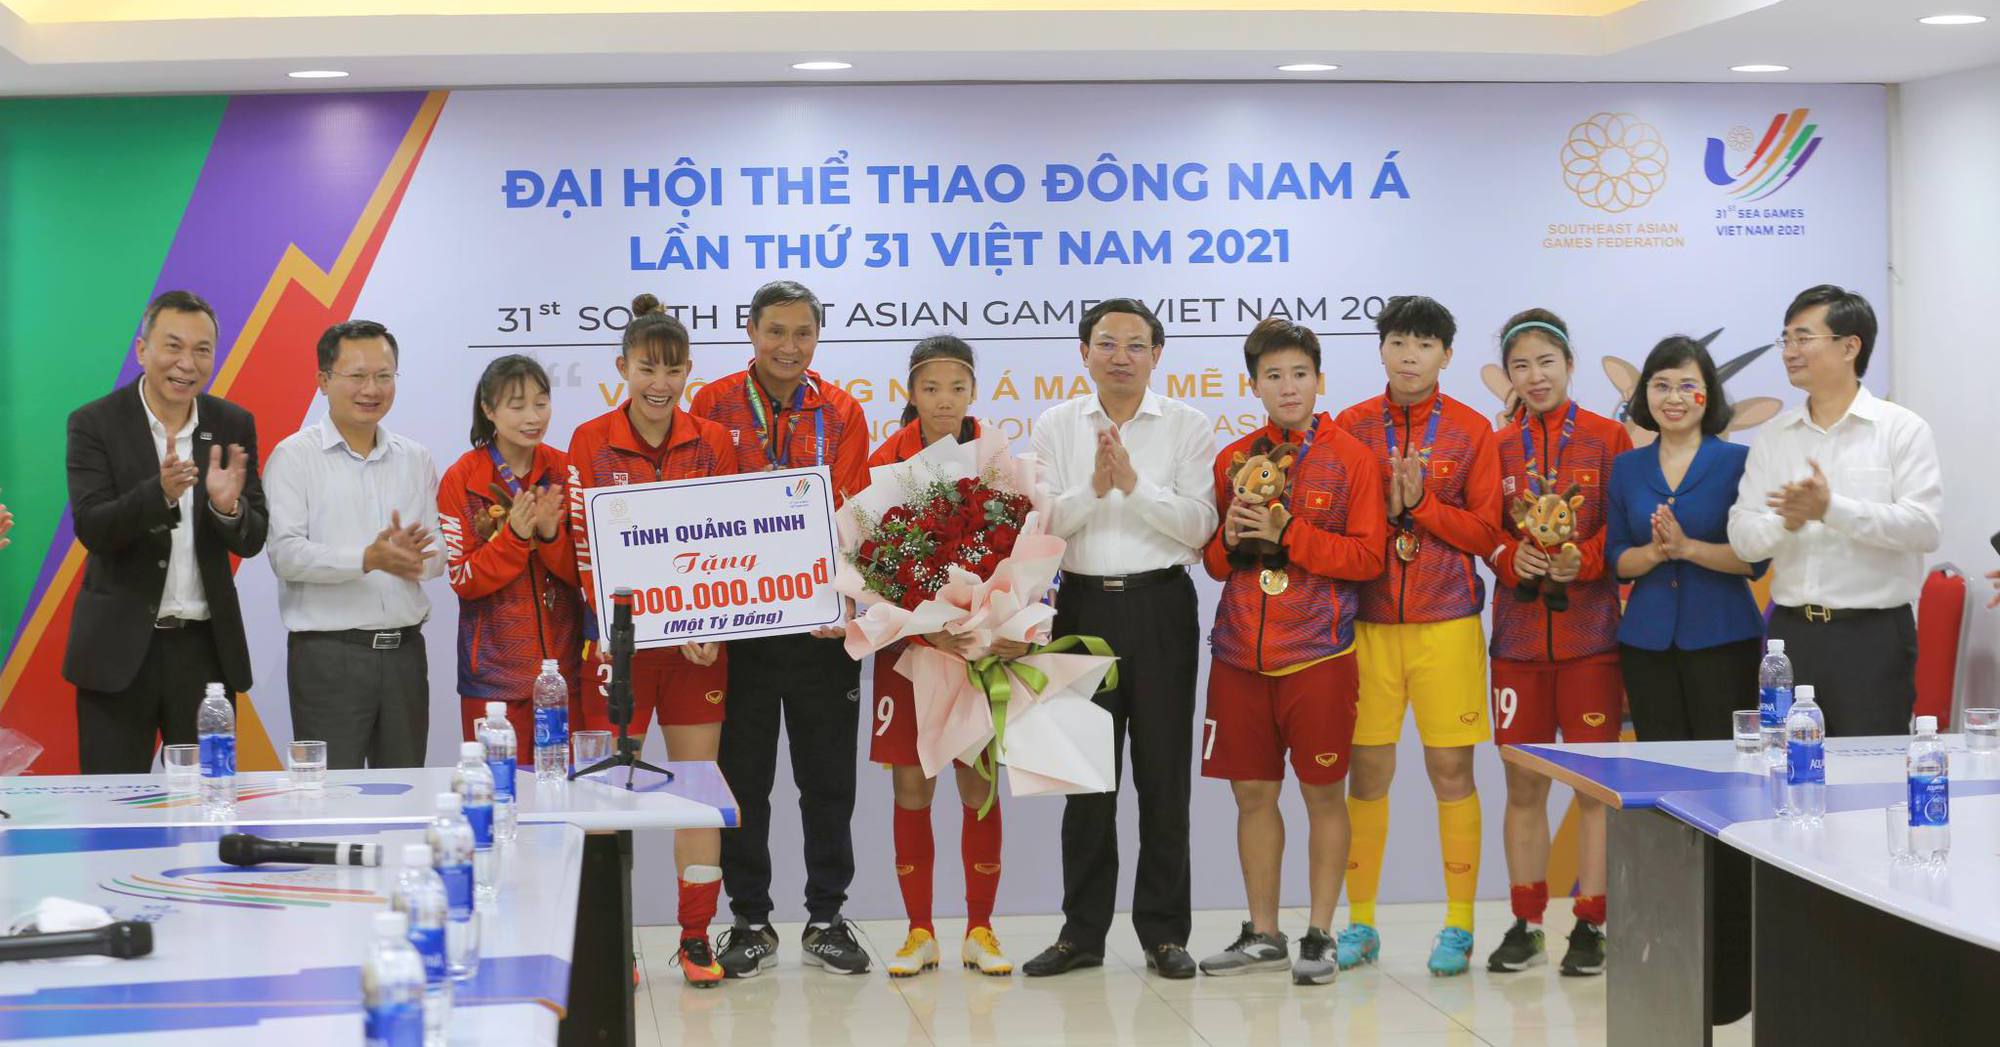 Making a “hat-trick” of gold, the Vietnamese women’s team received a reward of 6.6 billion VND